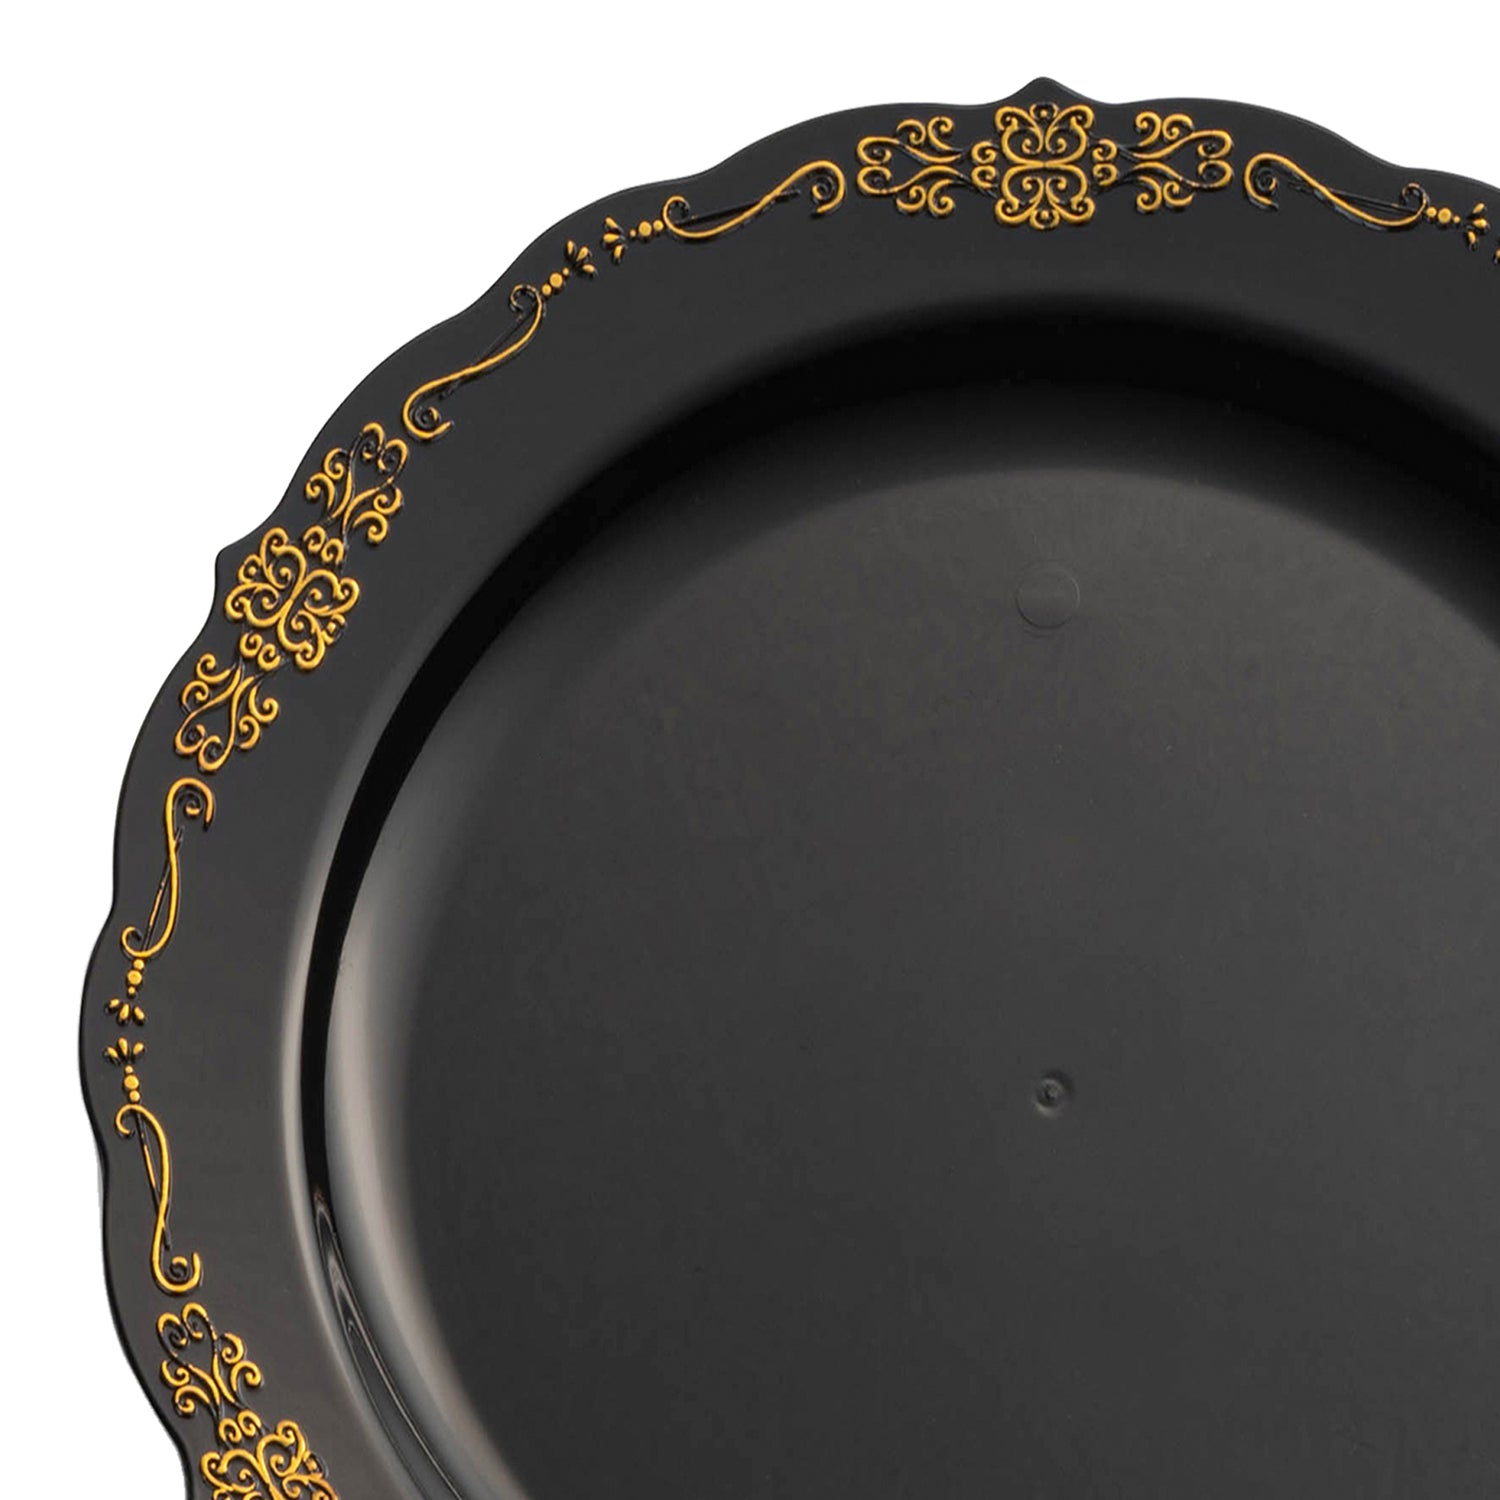 Black with Gold Vintage Rim Round Disposable Plastic Appetizer/Salad Plates (7.5") | The Kaya Collection